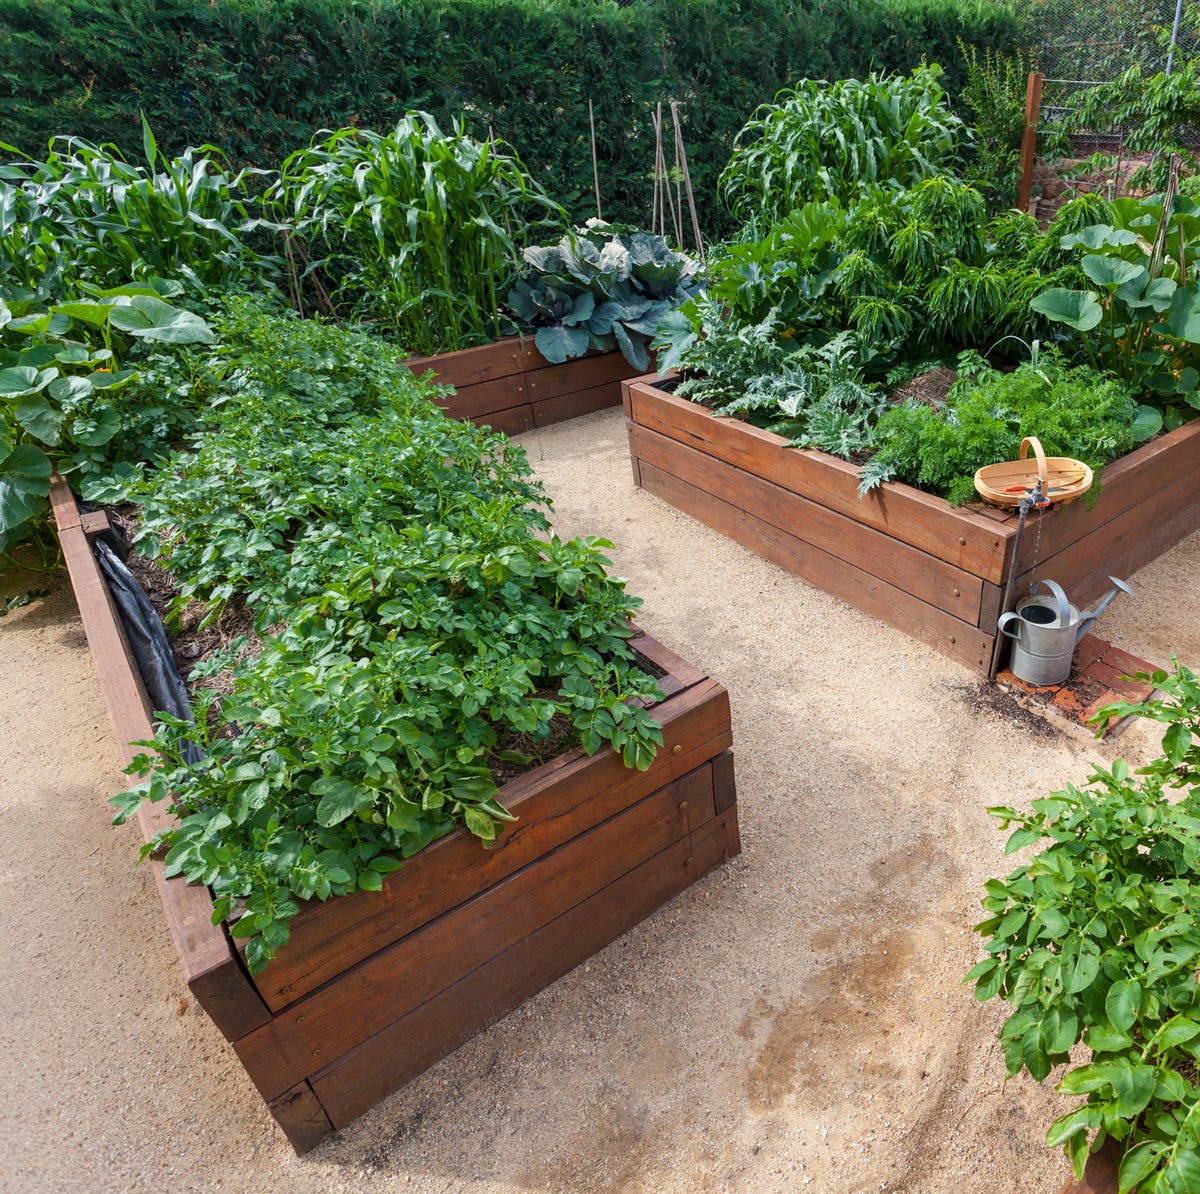 14 Raised Garden Bed Ideas to Elevate Your Yard